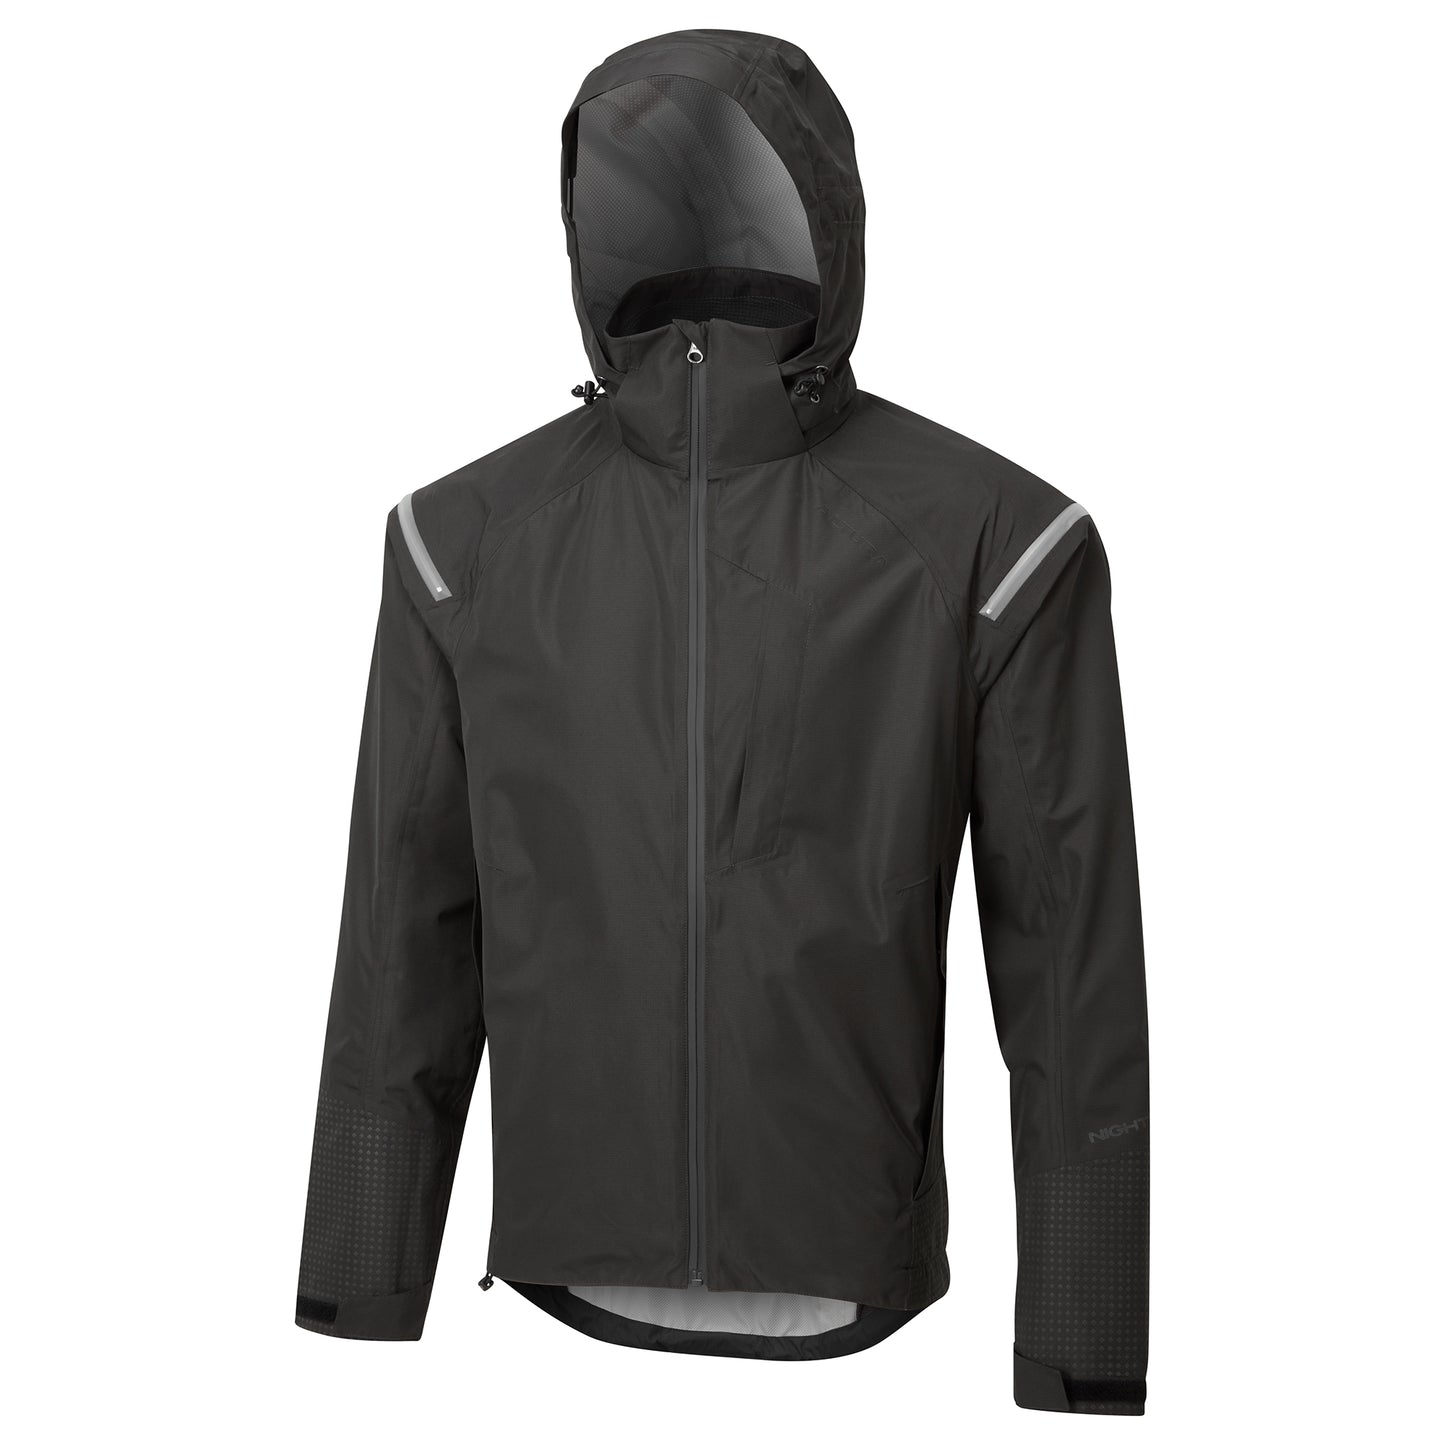 ALTURA NIGHTVISION ELECTRON MEN'S WATERPROOF CYCLING JACKET